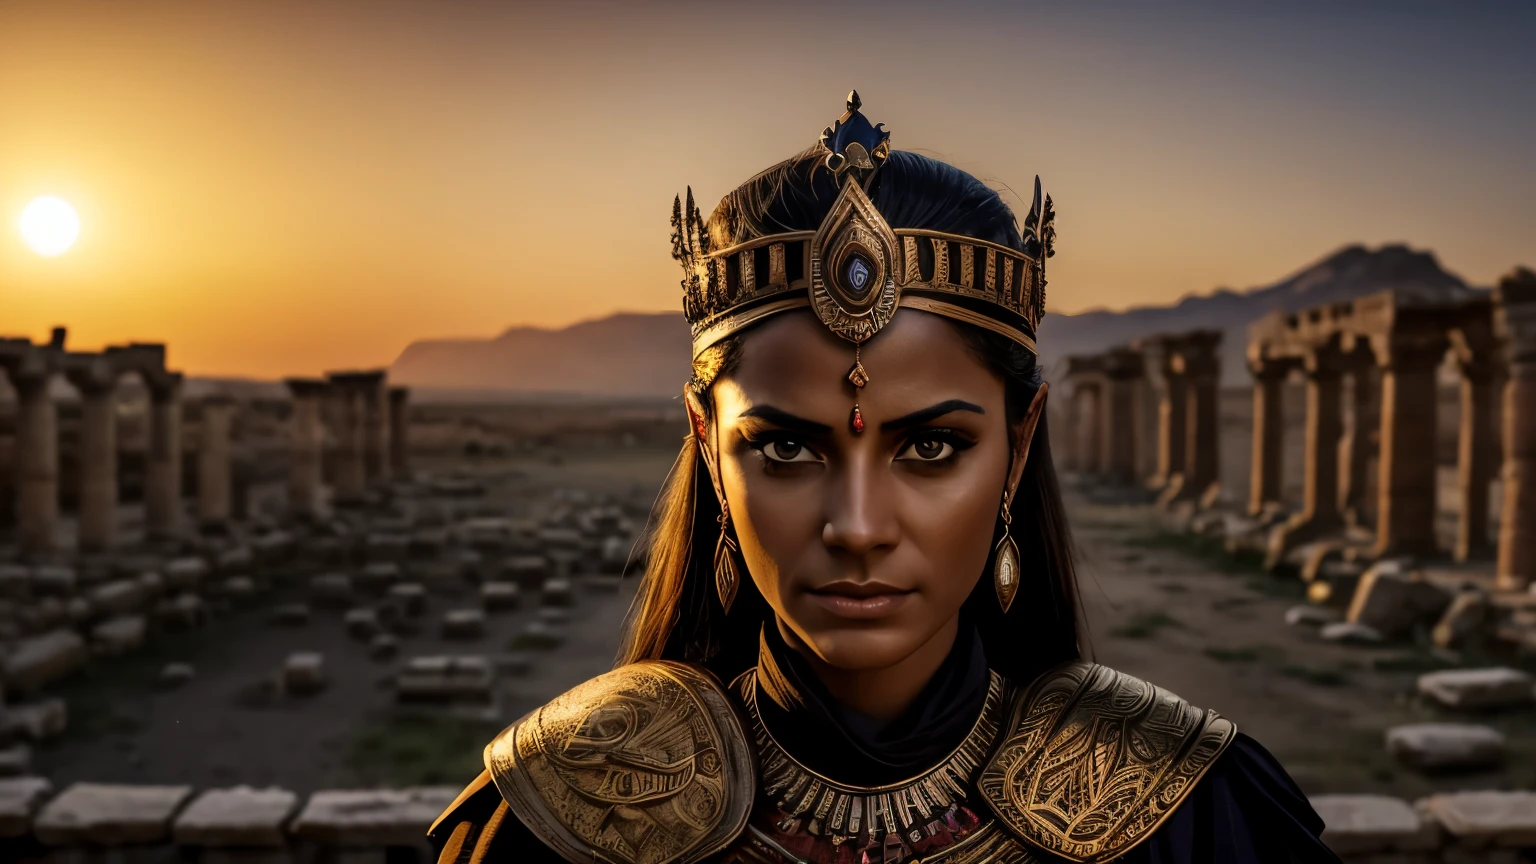 Imagine a cinematic shot of Zenobia, the warrior queen, standing atop the ancient walls of Palmyra at dusk, silhouetted against the fiery hues of the setting sun. The camera, positioned at a low angle, slowly pans upward to capture her commanding presence, framed by the crumbling architecture of the besieged city. Soft, golden light bathes the scene, casting long shadows that accentuate the rugged terrain and the determination etched upon Zenobia's face. The soundtrack swells with epic orchestral music, heightening the sense of drama and anticipation as Zenobia prepares to lead her people into battle against the encroaching Roman legions. The overall effect is one of cinematic grandeur, invoking the timeless allure of ancient legends and the indomitable spirit of a queen defying the might of empires